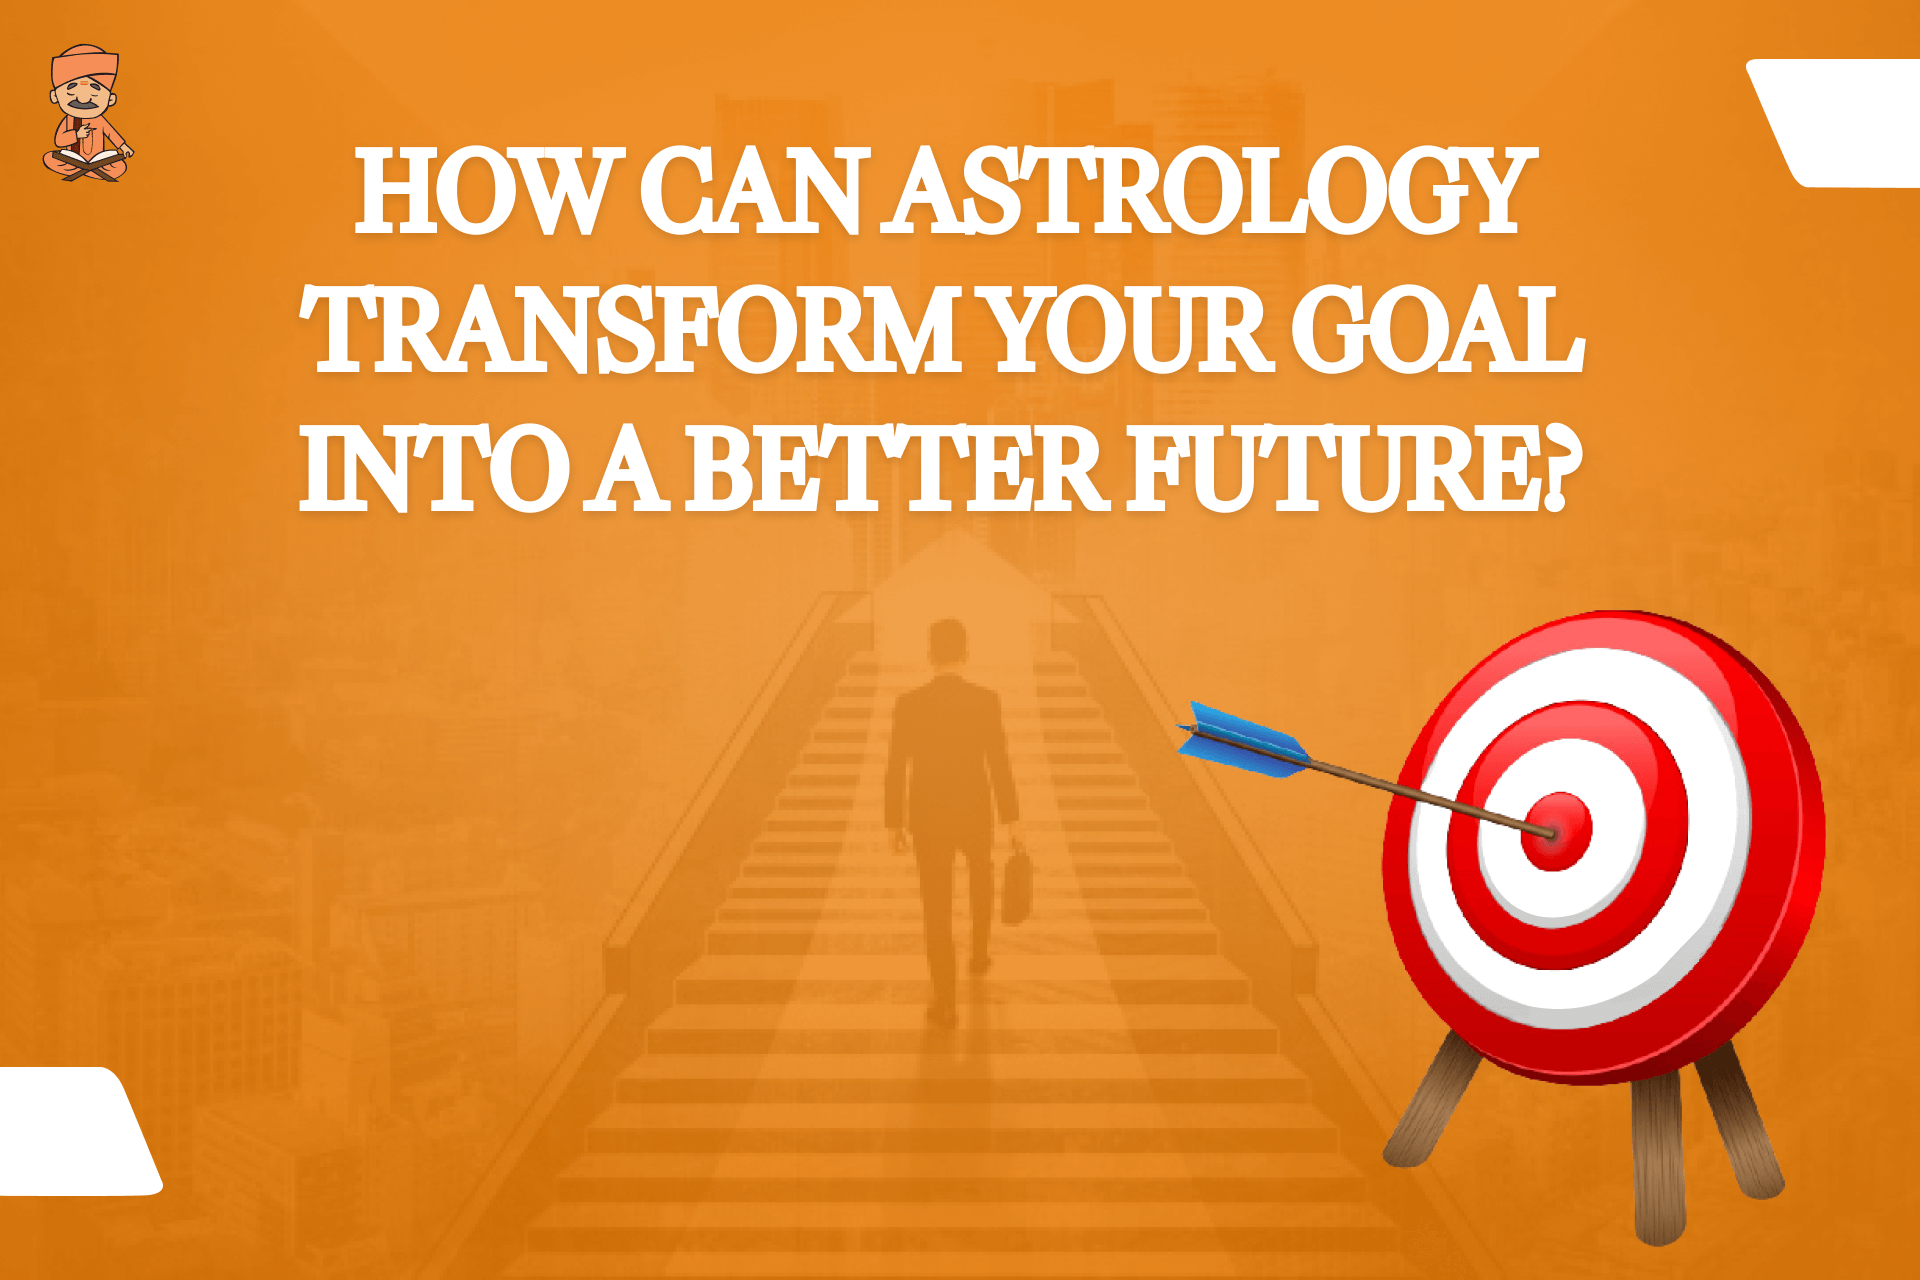 How can Astrology transform your goal into a better future?